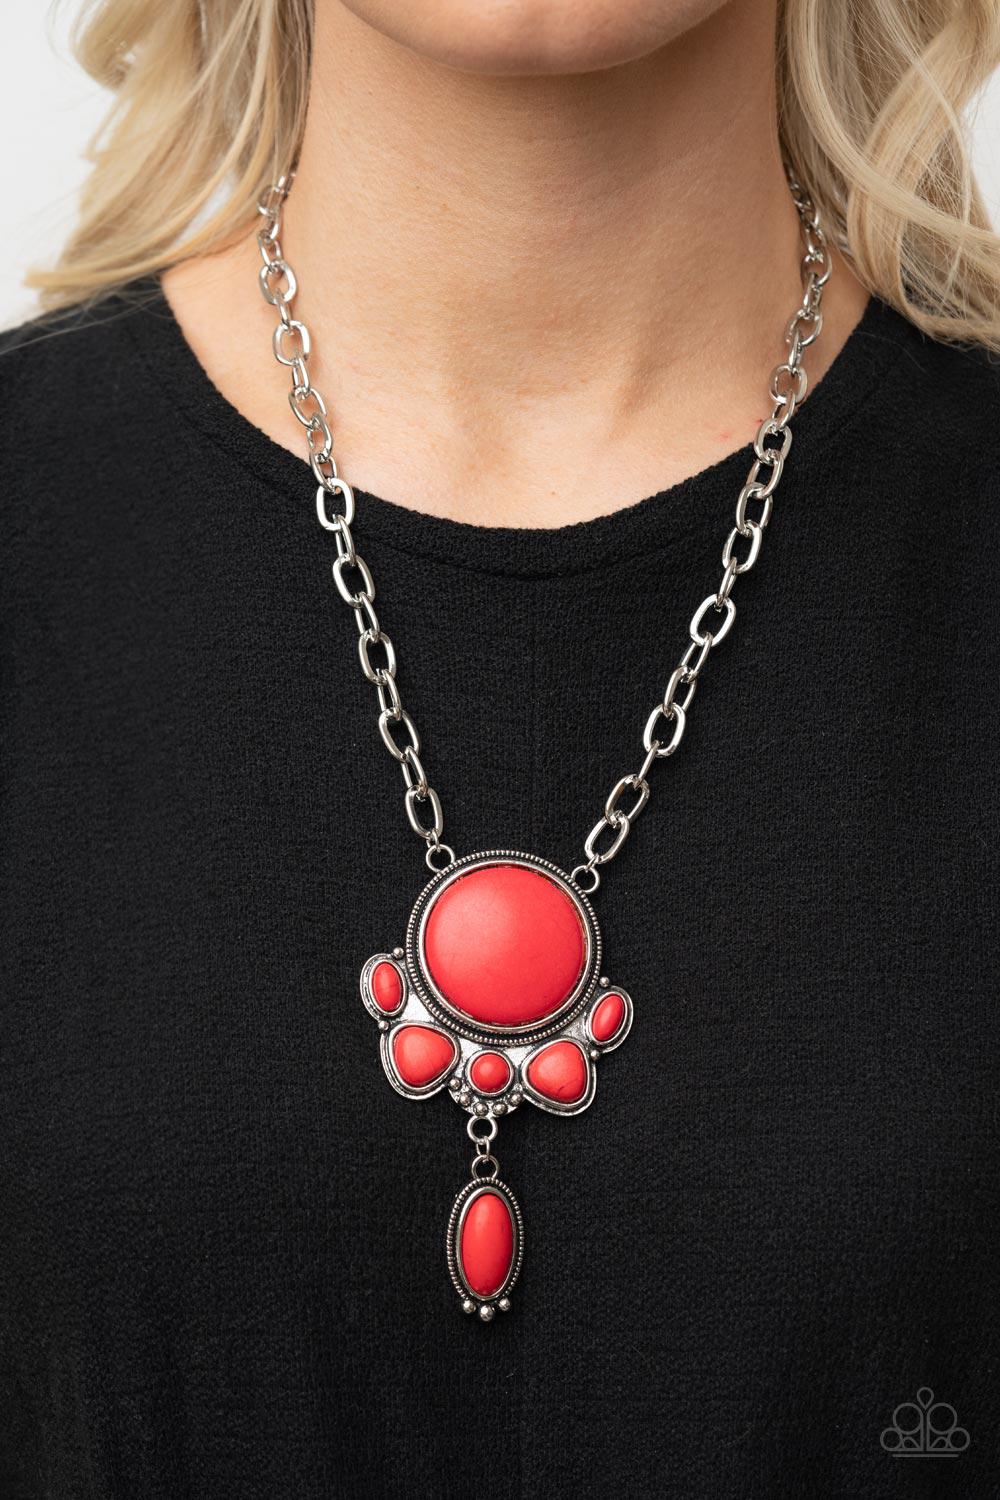 Geographically Gorgeous Red Stone Necklace - Paparazzi Accessories- model - CarasShop.com - $5 Jewelry by Cara Jewels